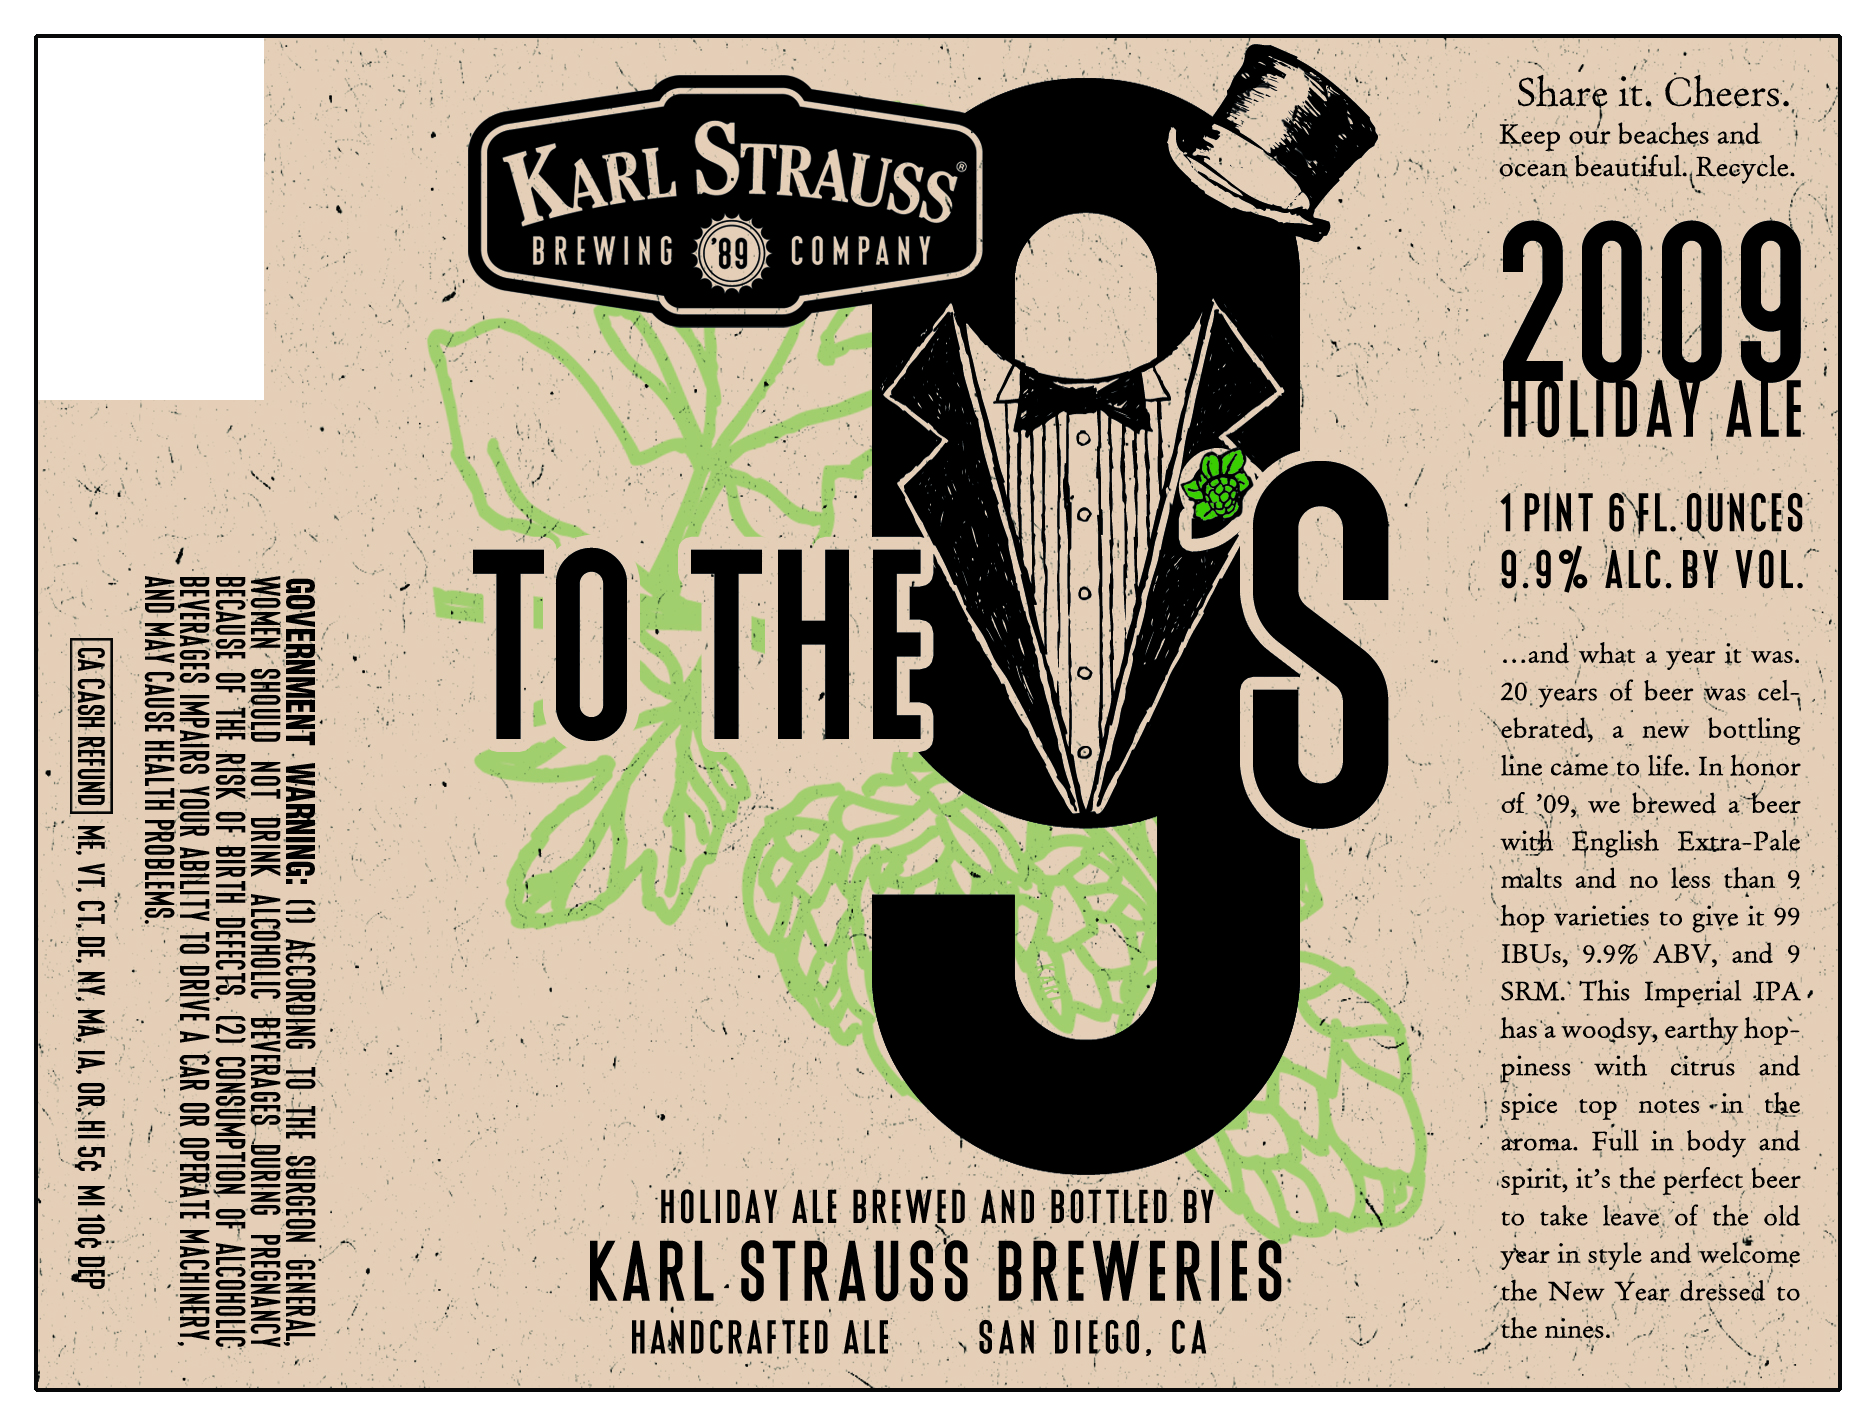 Karl Strauss To the 9’s Holiday Ale